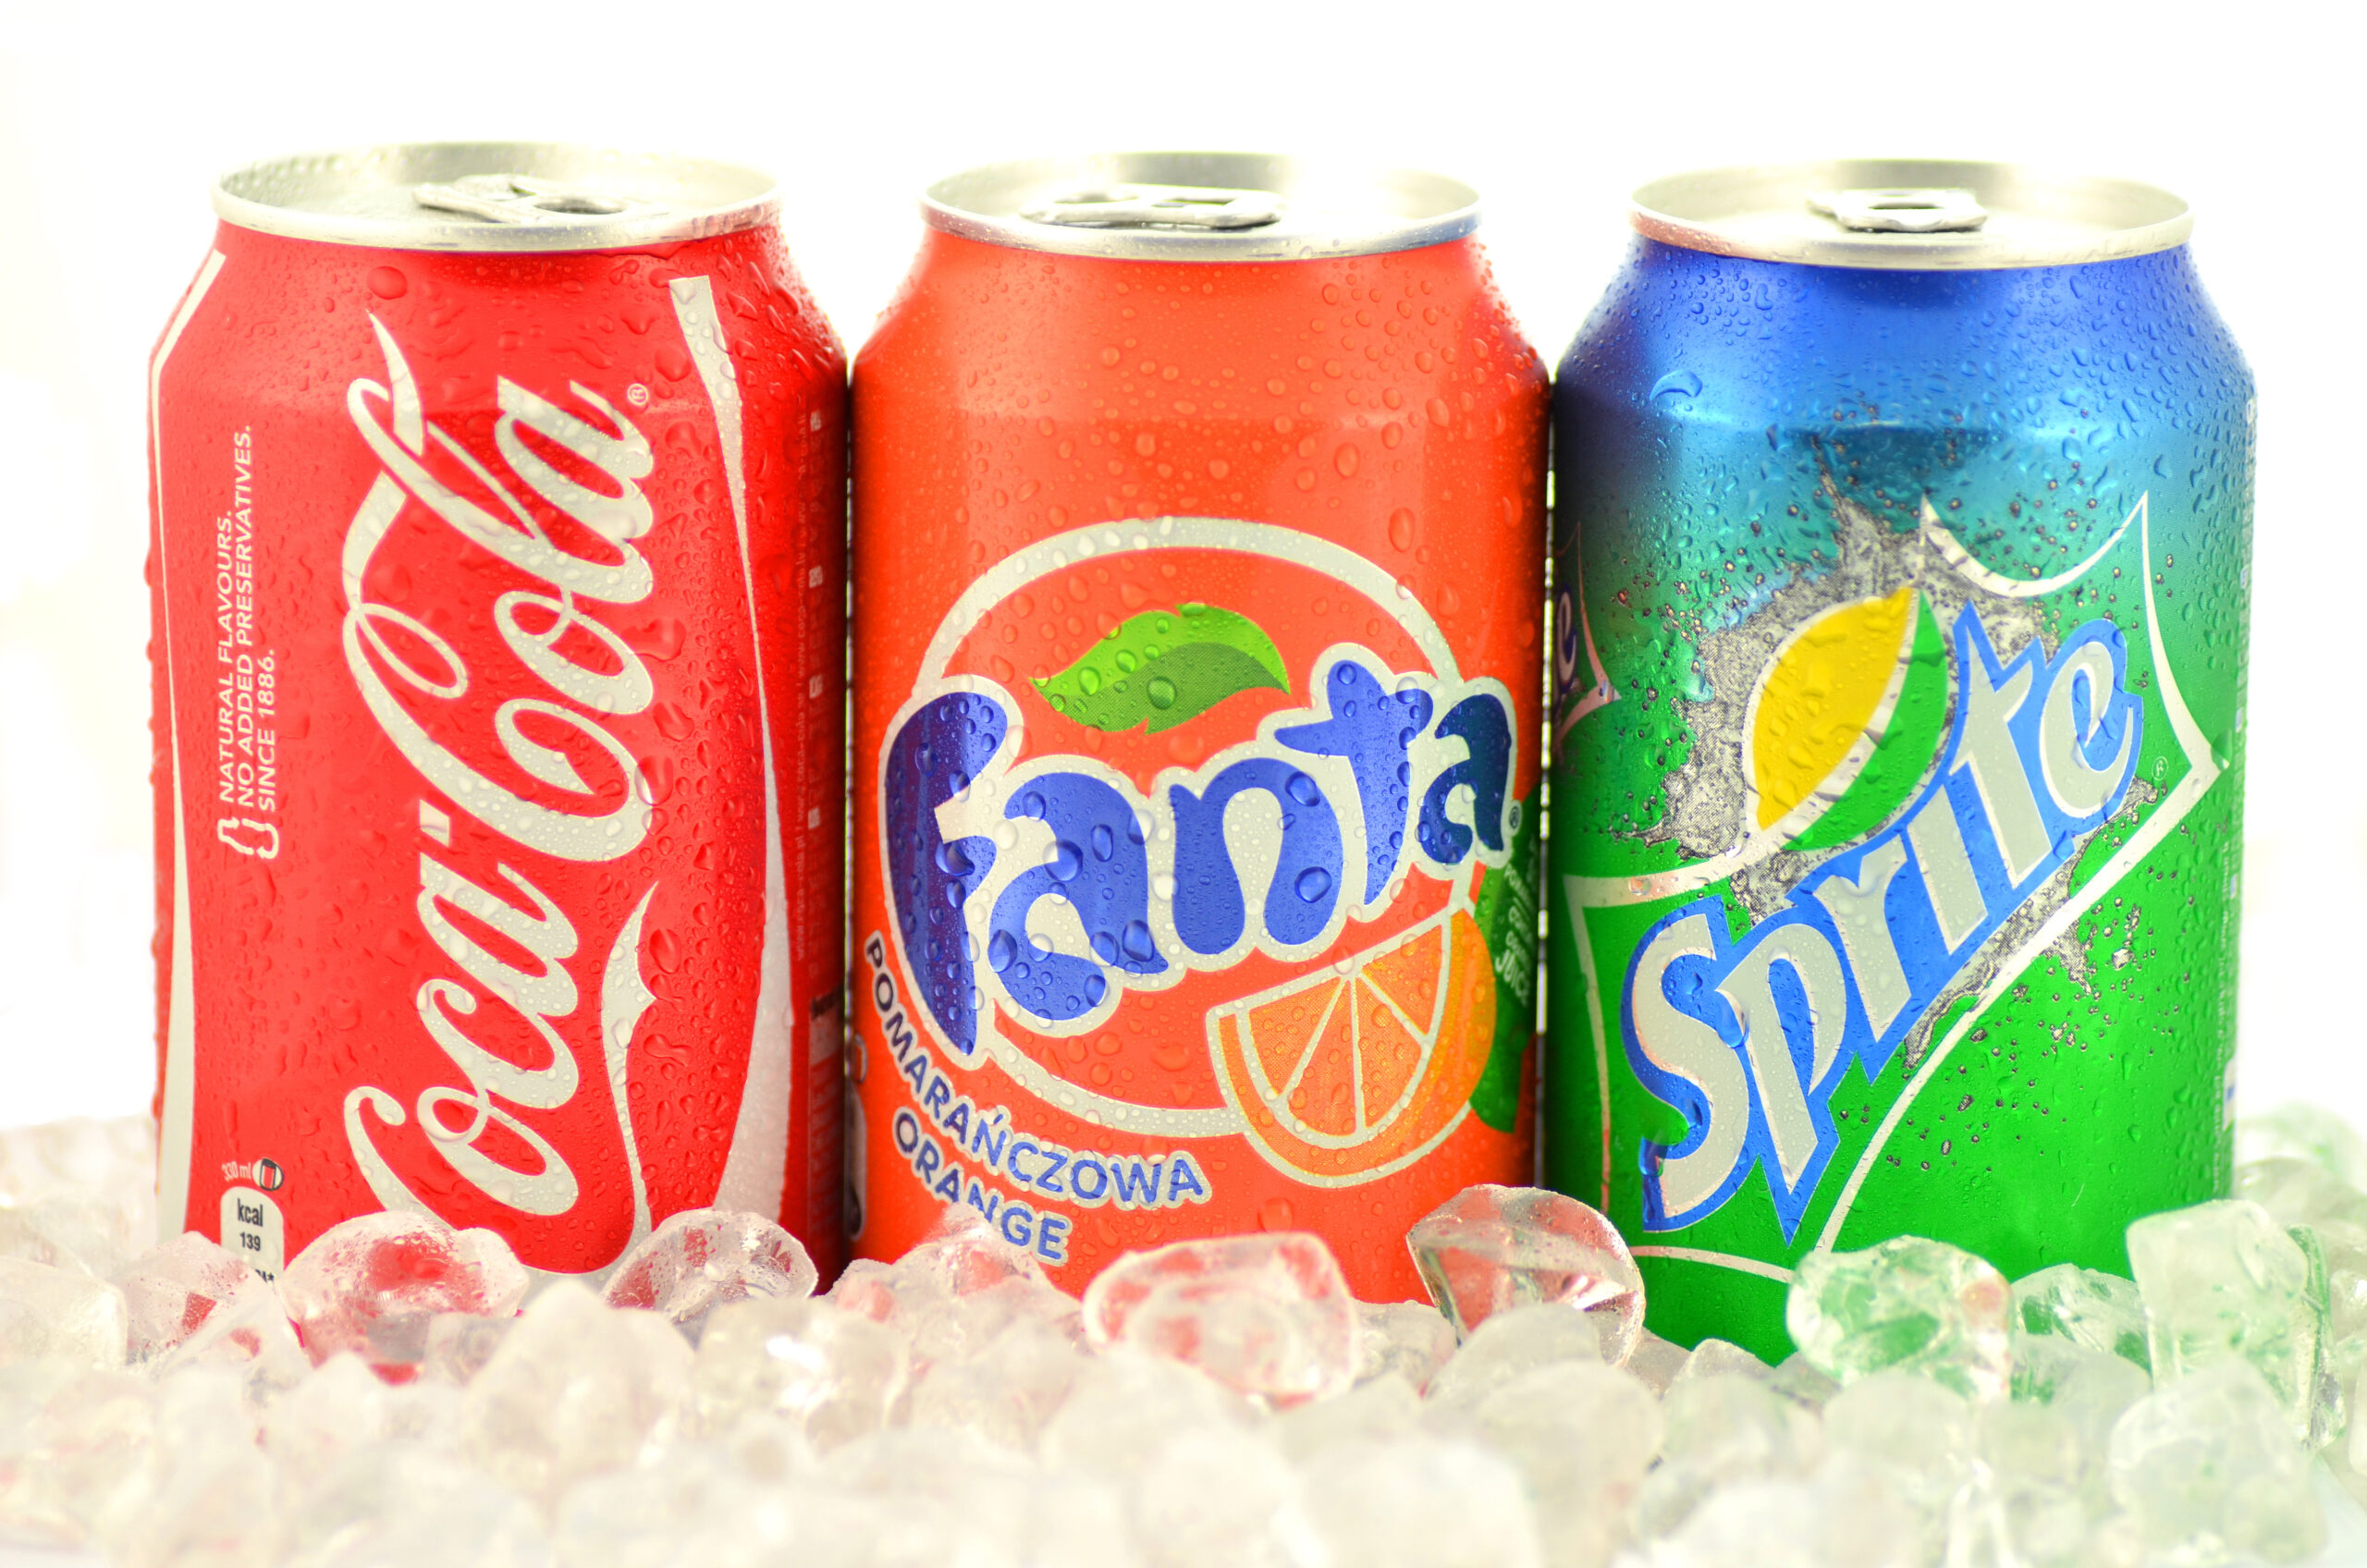 Kwidzyn, Poland - March 15, 2014: Can of Coca-Cola, Fanta and Sprite drinks on ice. They are produced by Coca-Cola Company. Coca-Cola was introduced in 1886, Fanta in 1941 and Sprite in 1961